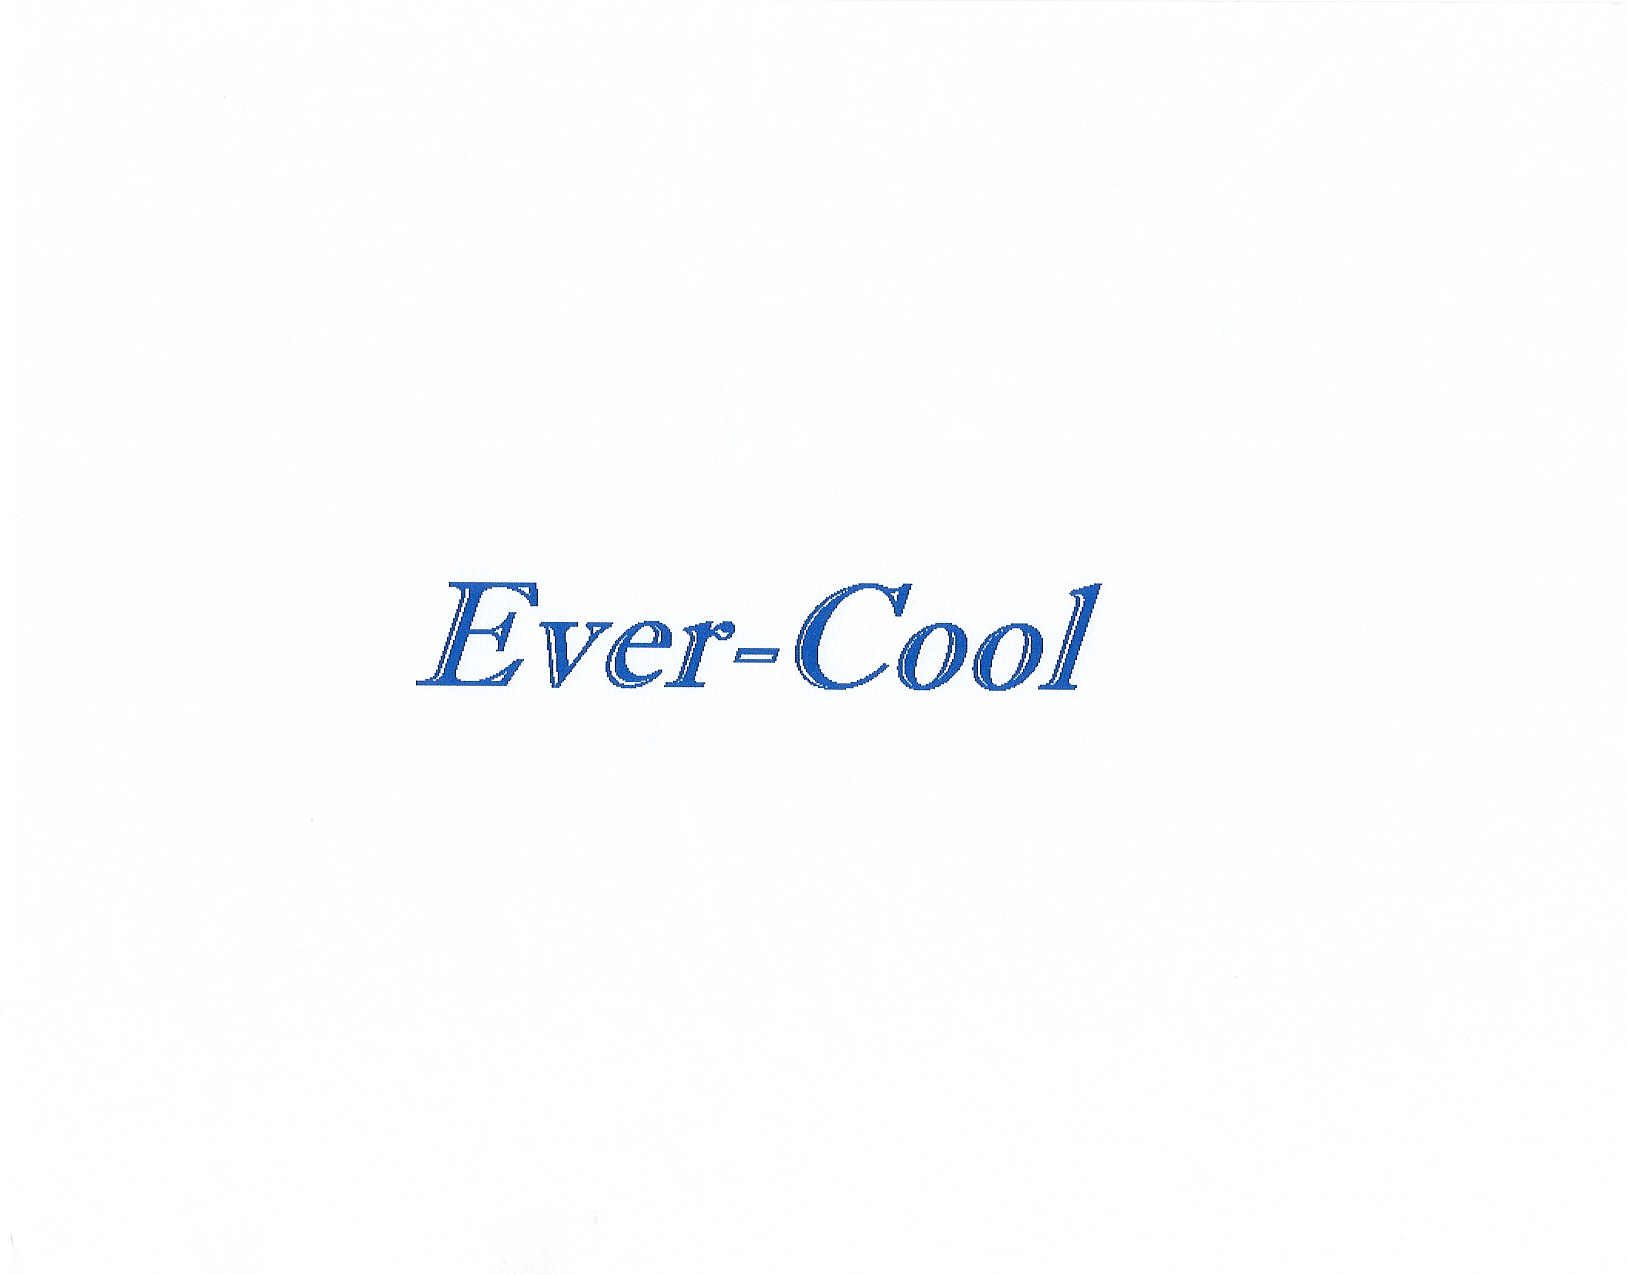 EVER-COOL